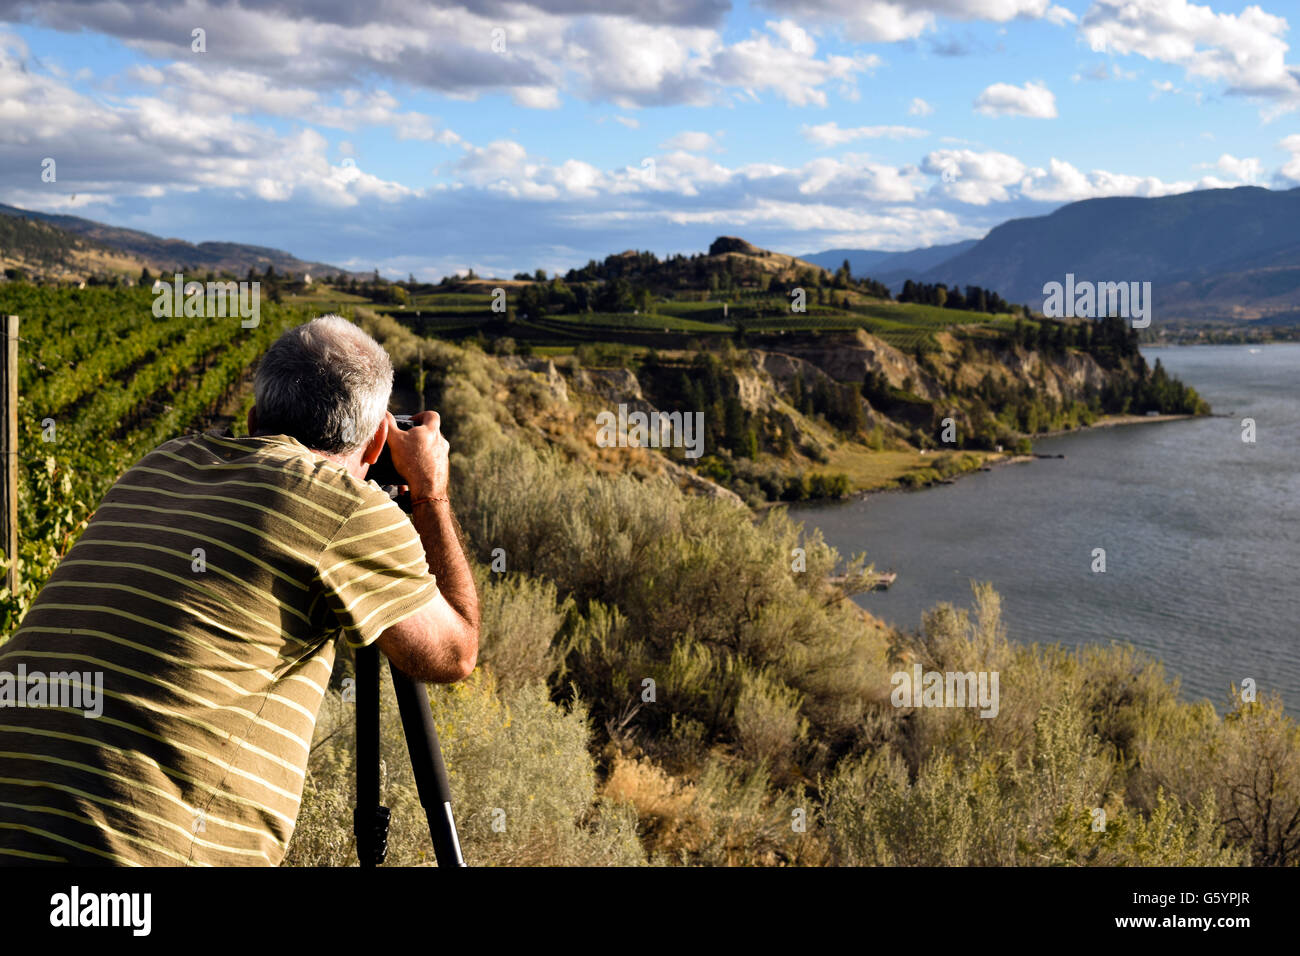 Senior adult man photographing a scenic of vineyards in Naramata, British Columbia, Canada located in the Okanagan Valley. Stock Photo